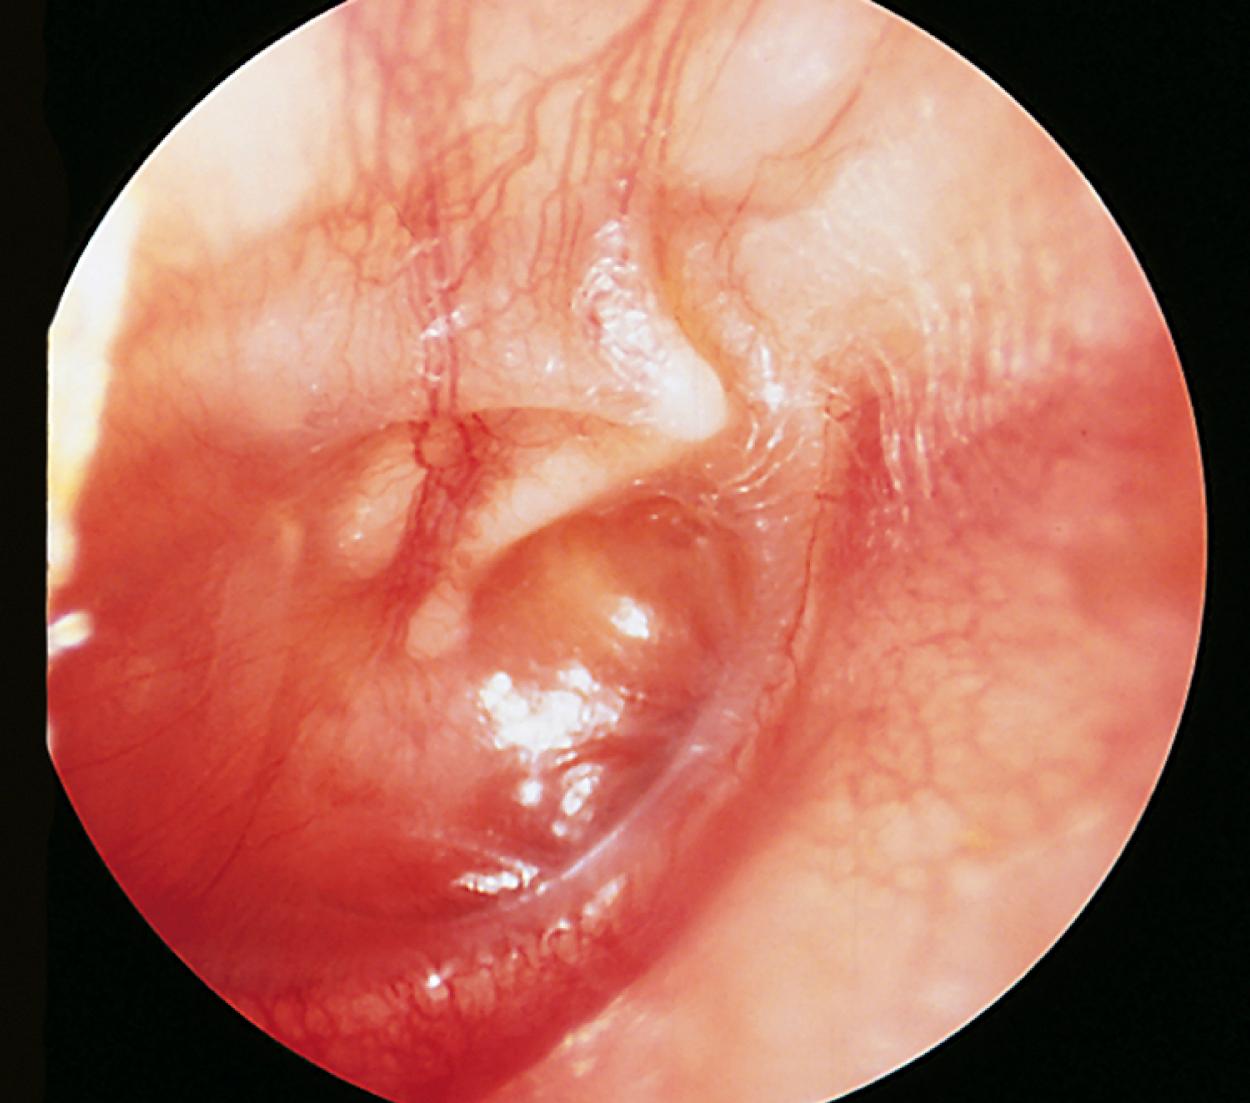 Fig. 24.27, Serous otitis media. This patient has a chronic serous middle ear effusion. The tympanic membrane is retracted, thickened, and shiny. Behind it is a clear yellow effusion. Mobility was decreased and primarily evident on negative pressure. The child was not acutely ill but did have decreased hearing.